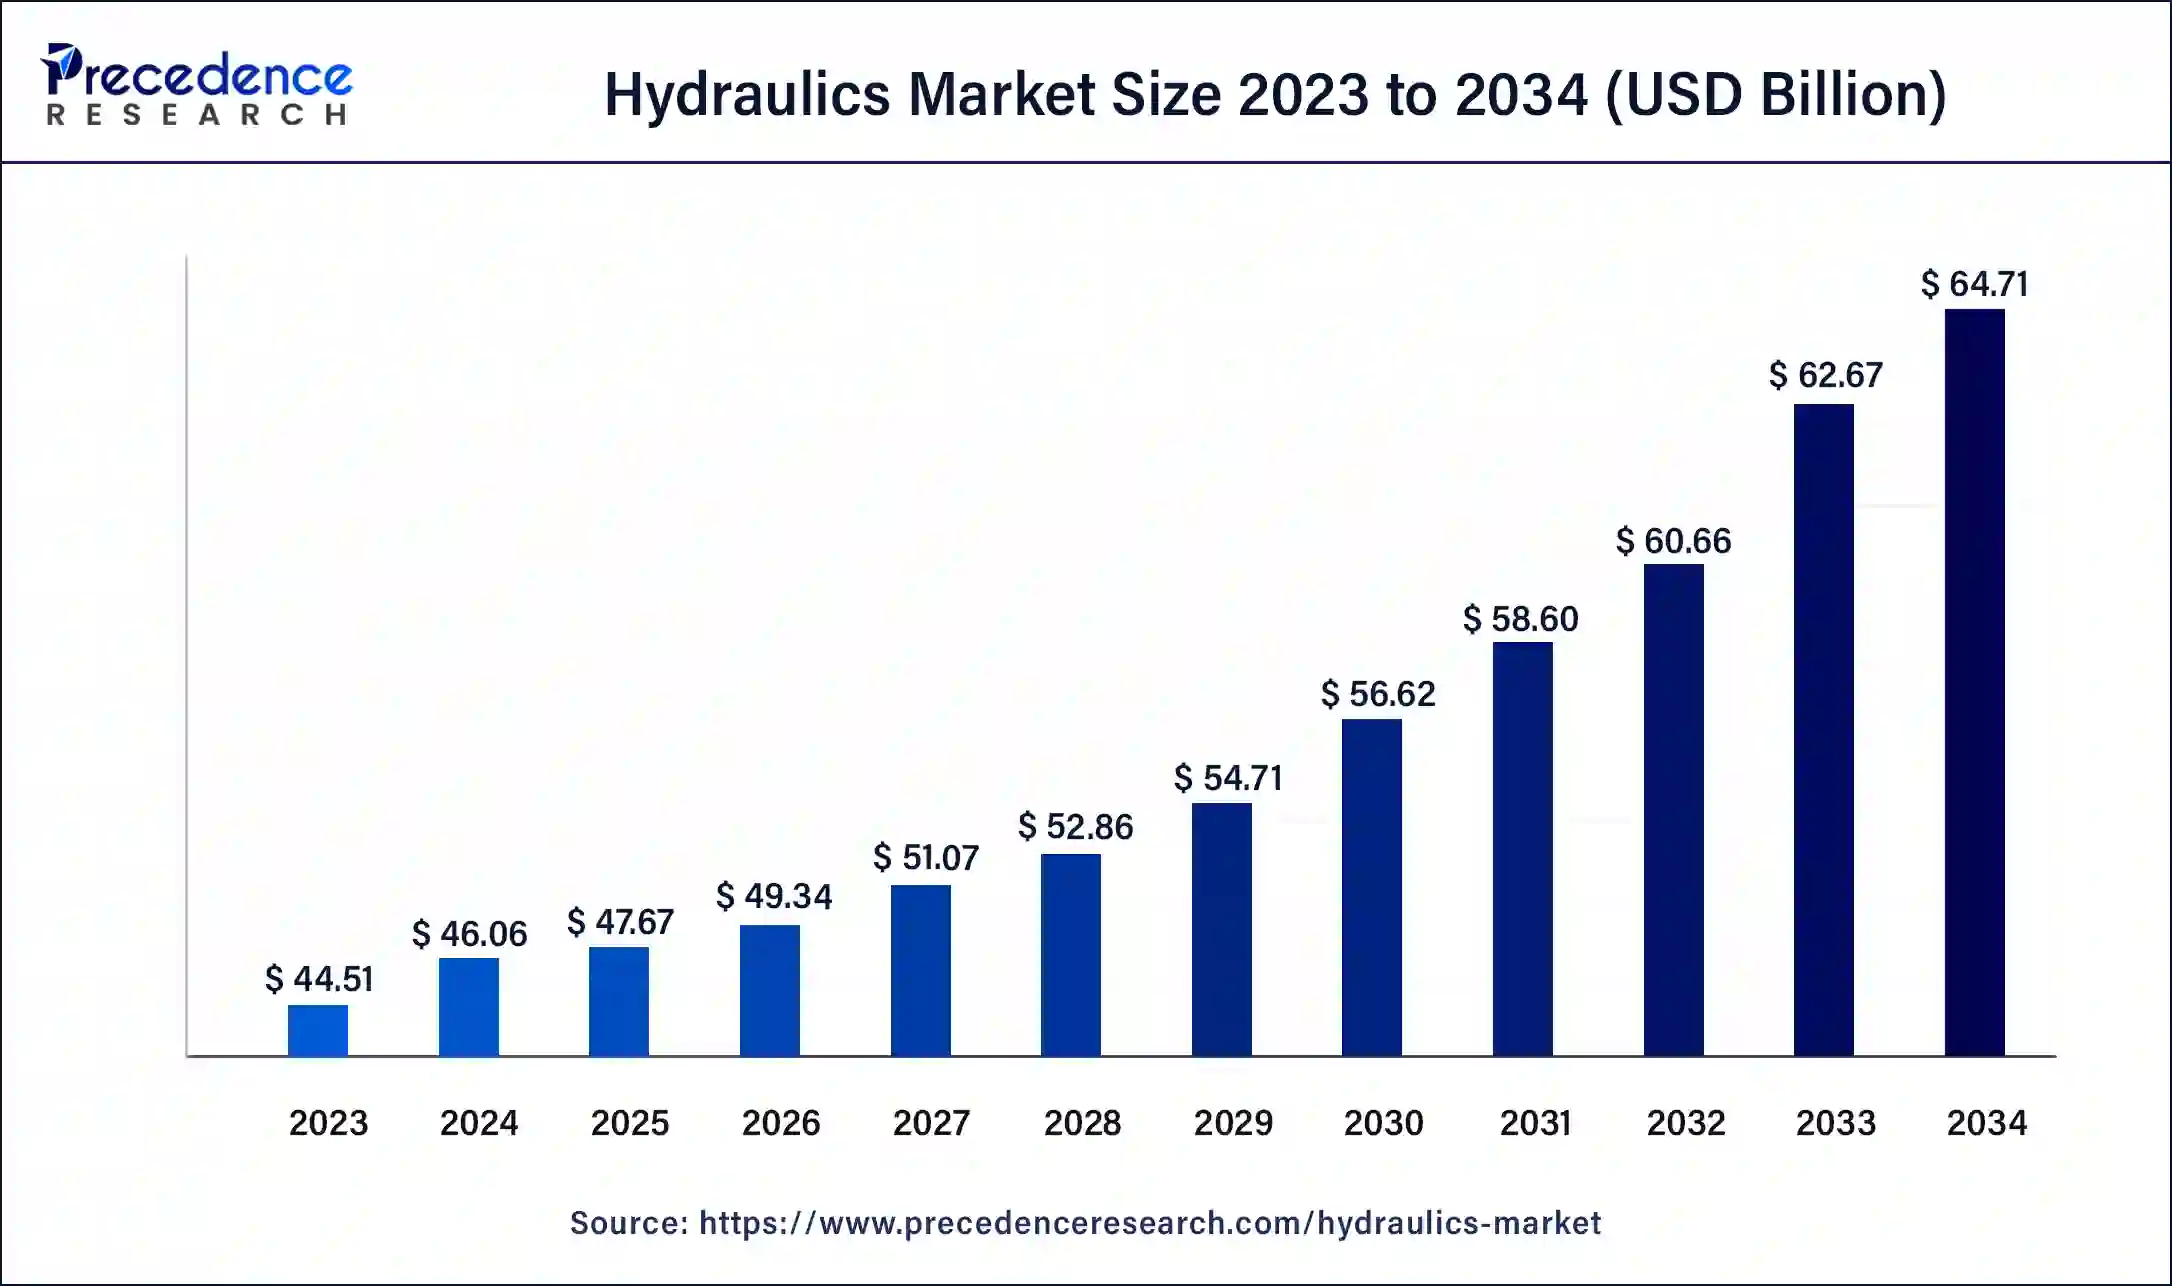 Hydraulics Market Size 2024 To 2034